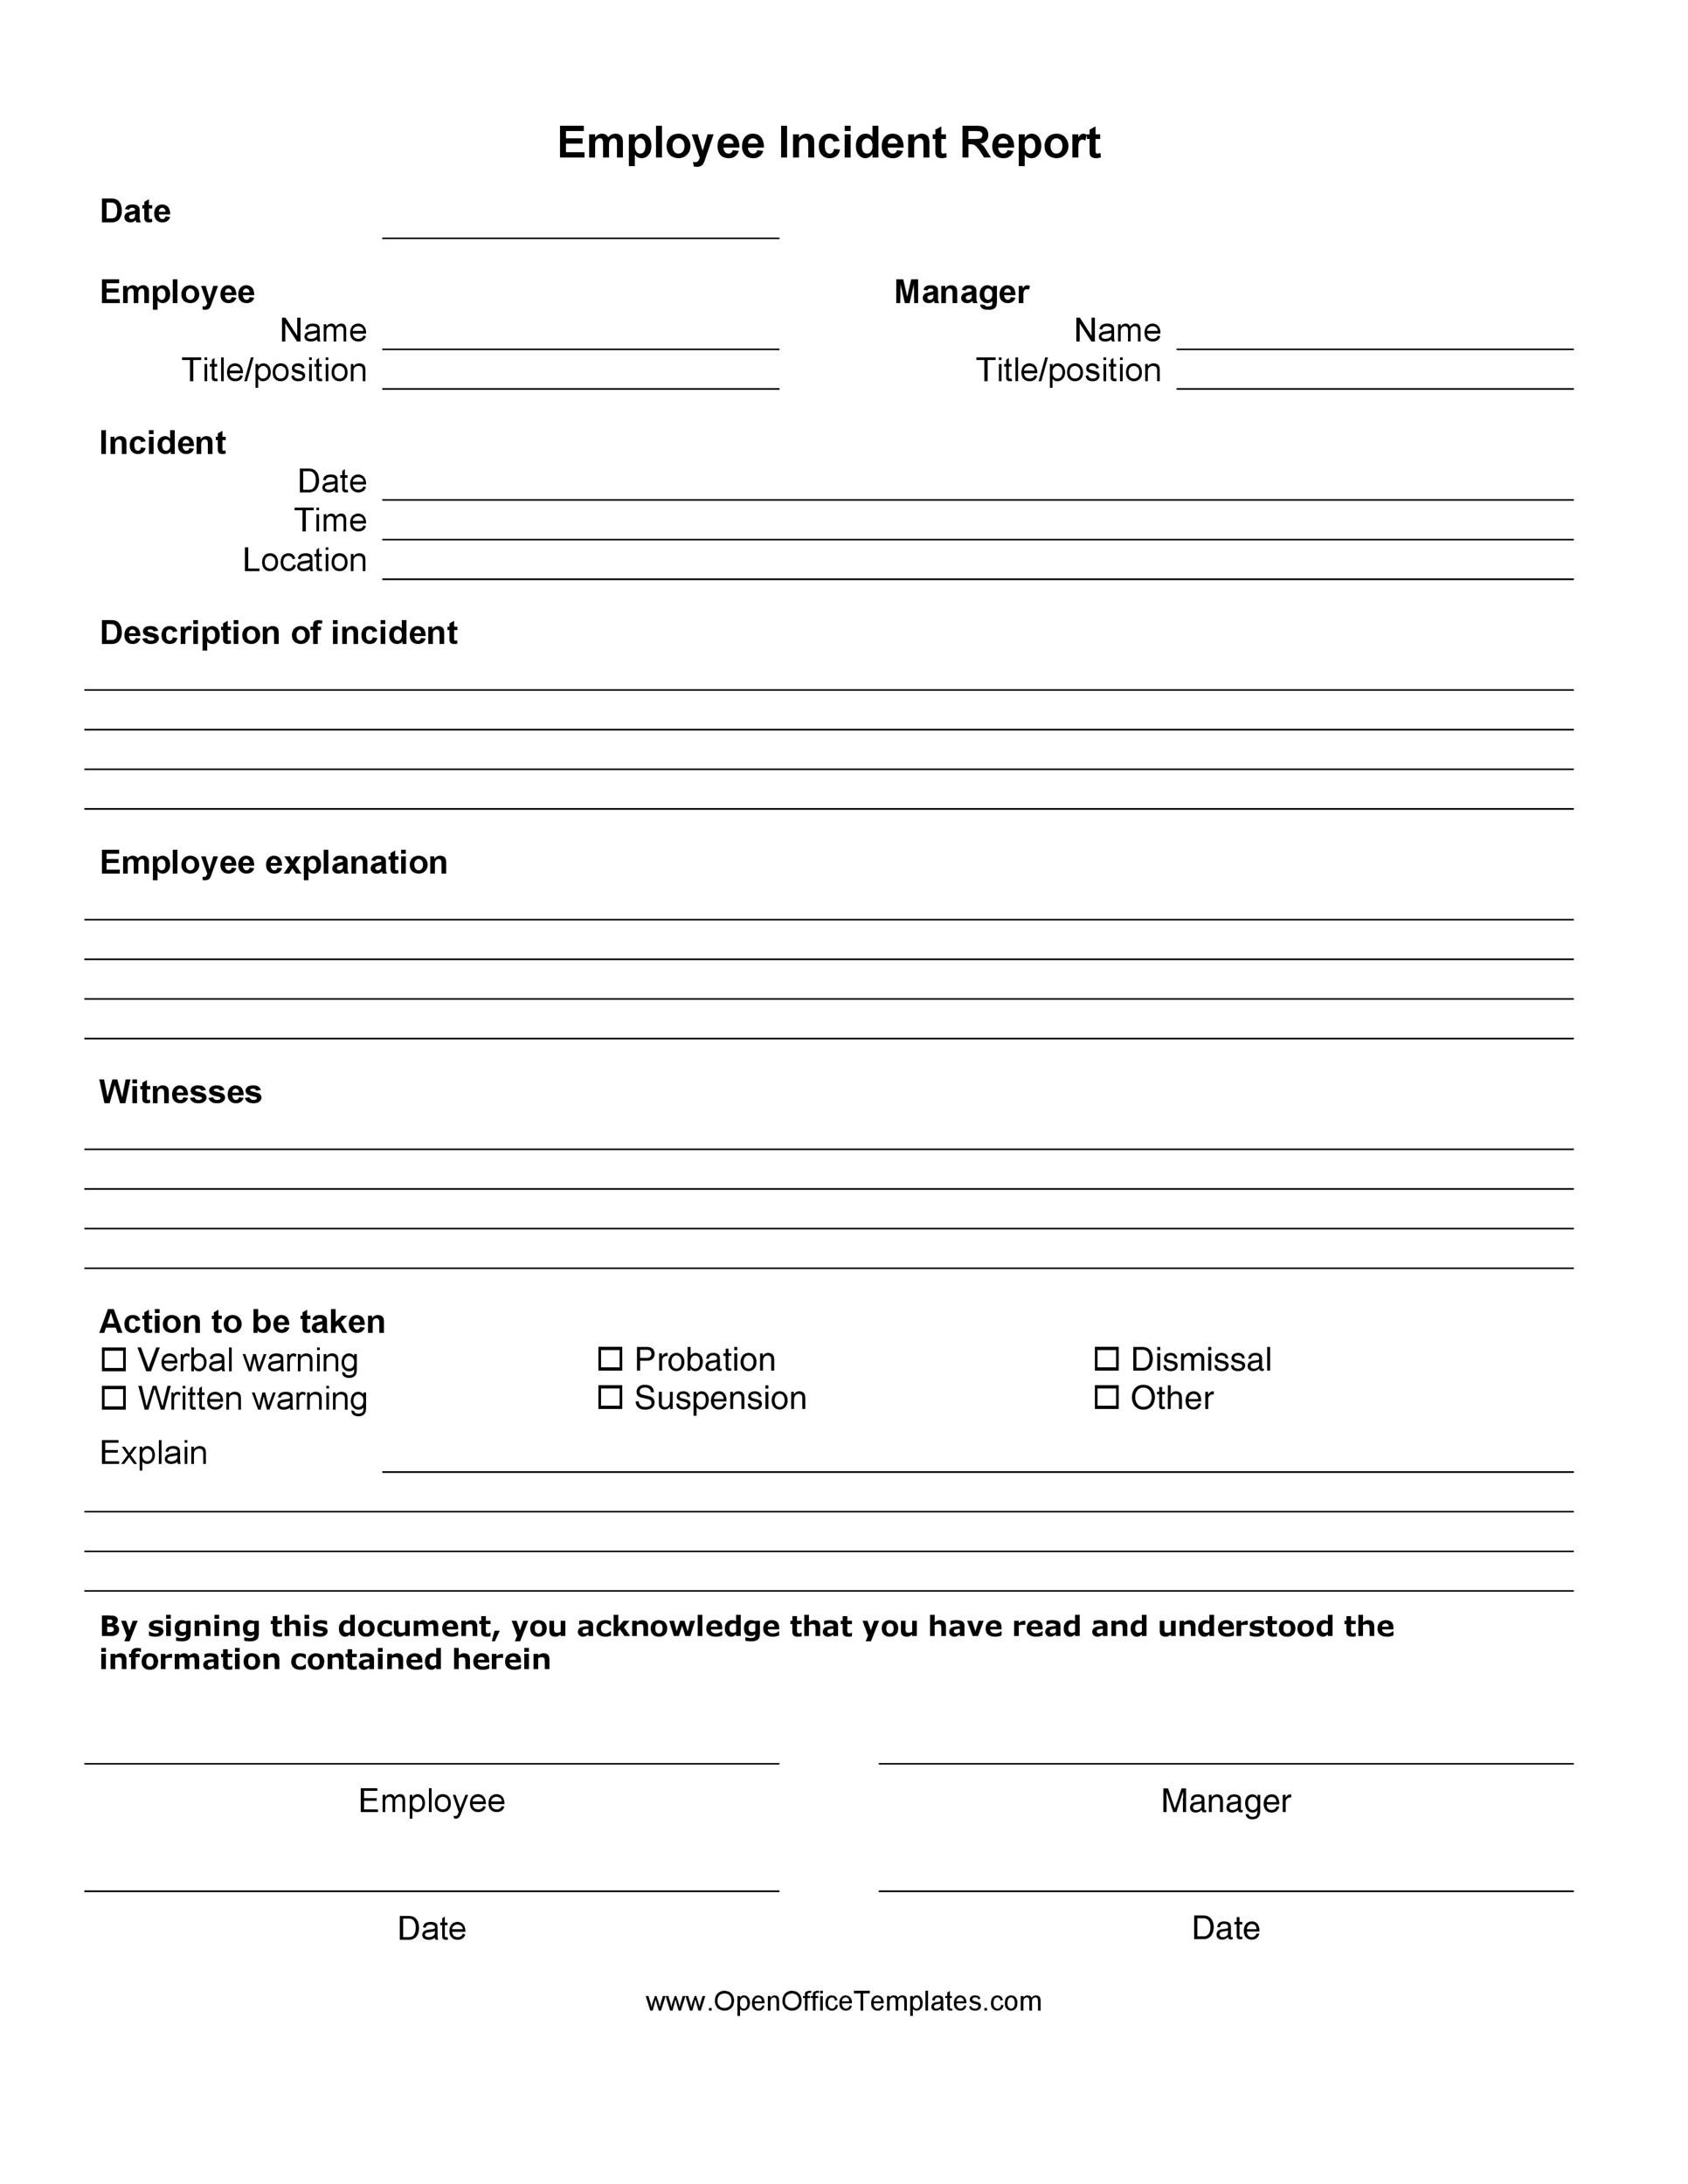 incident-report-form-template-word